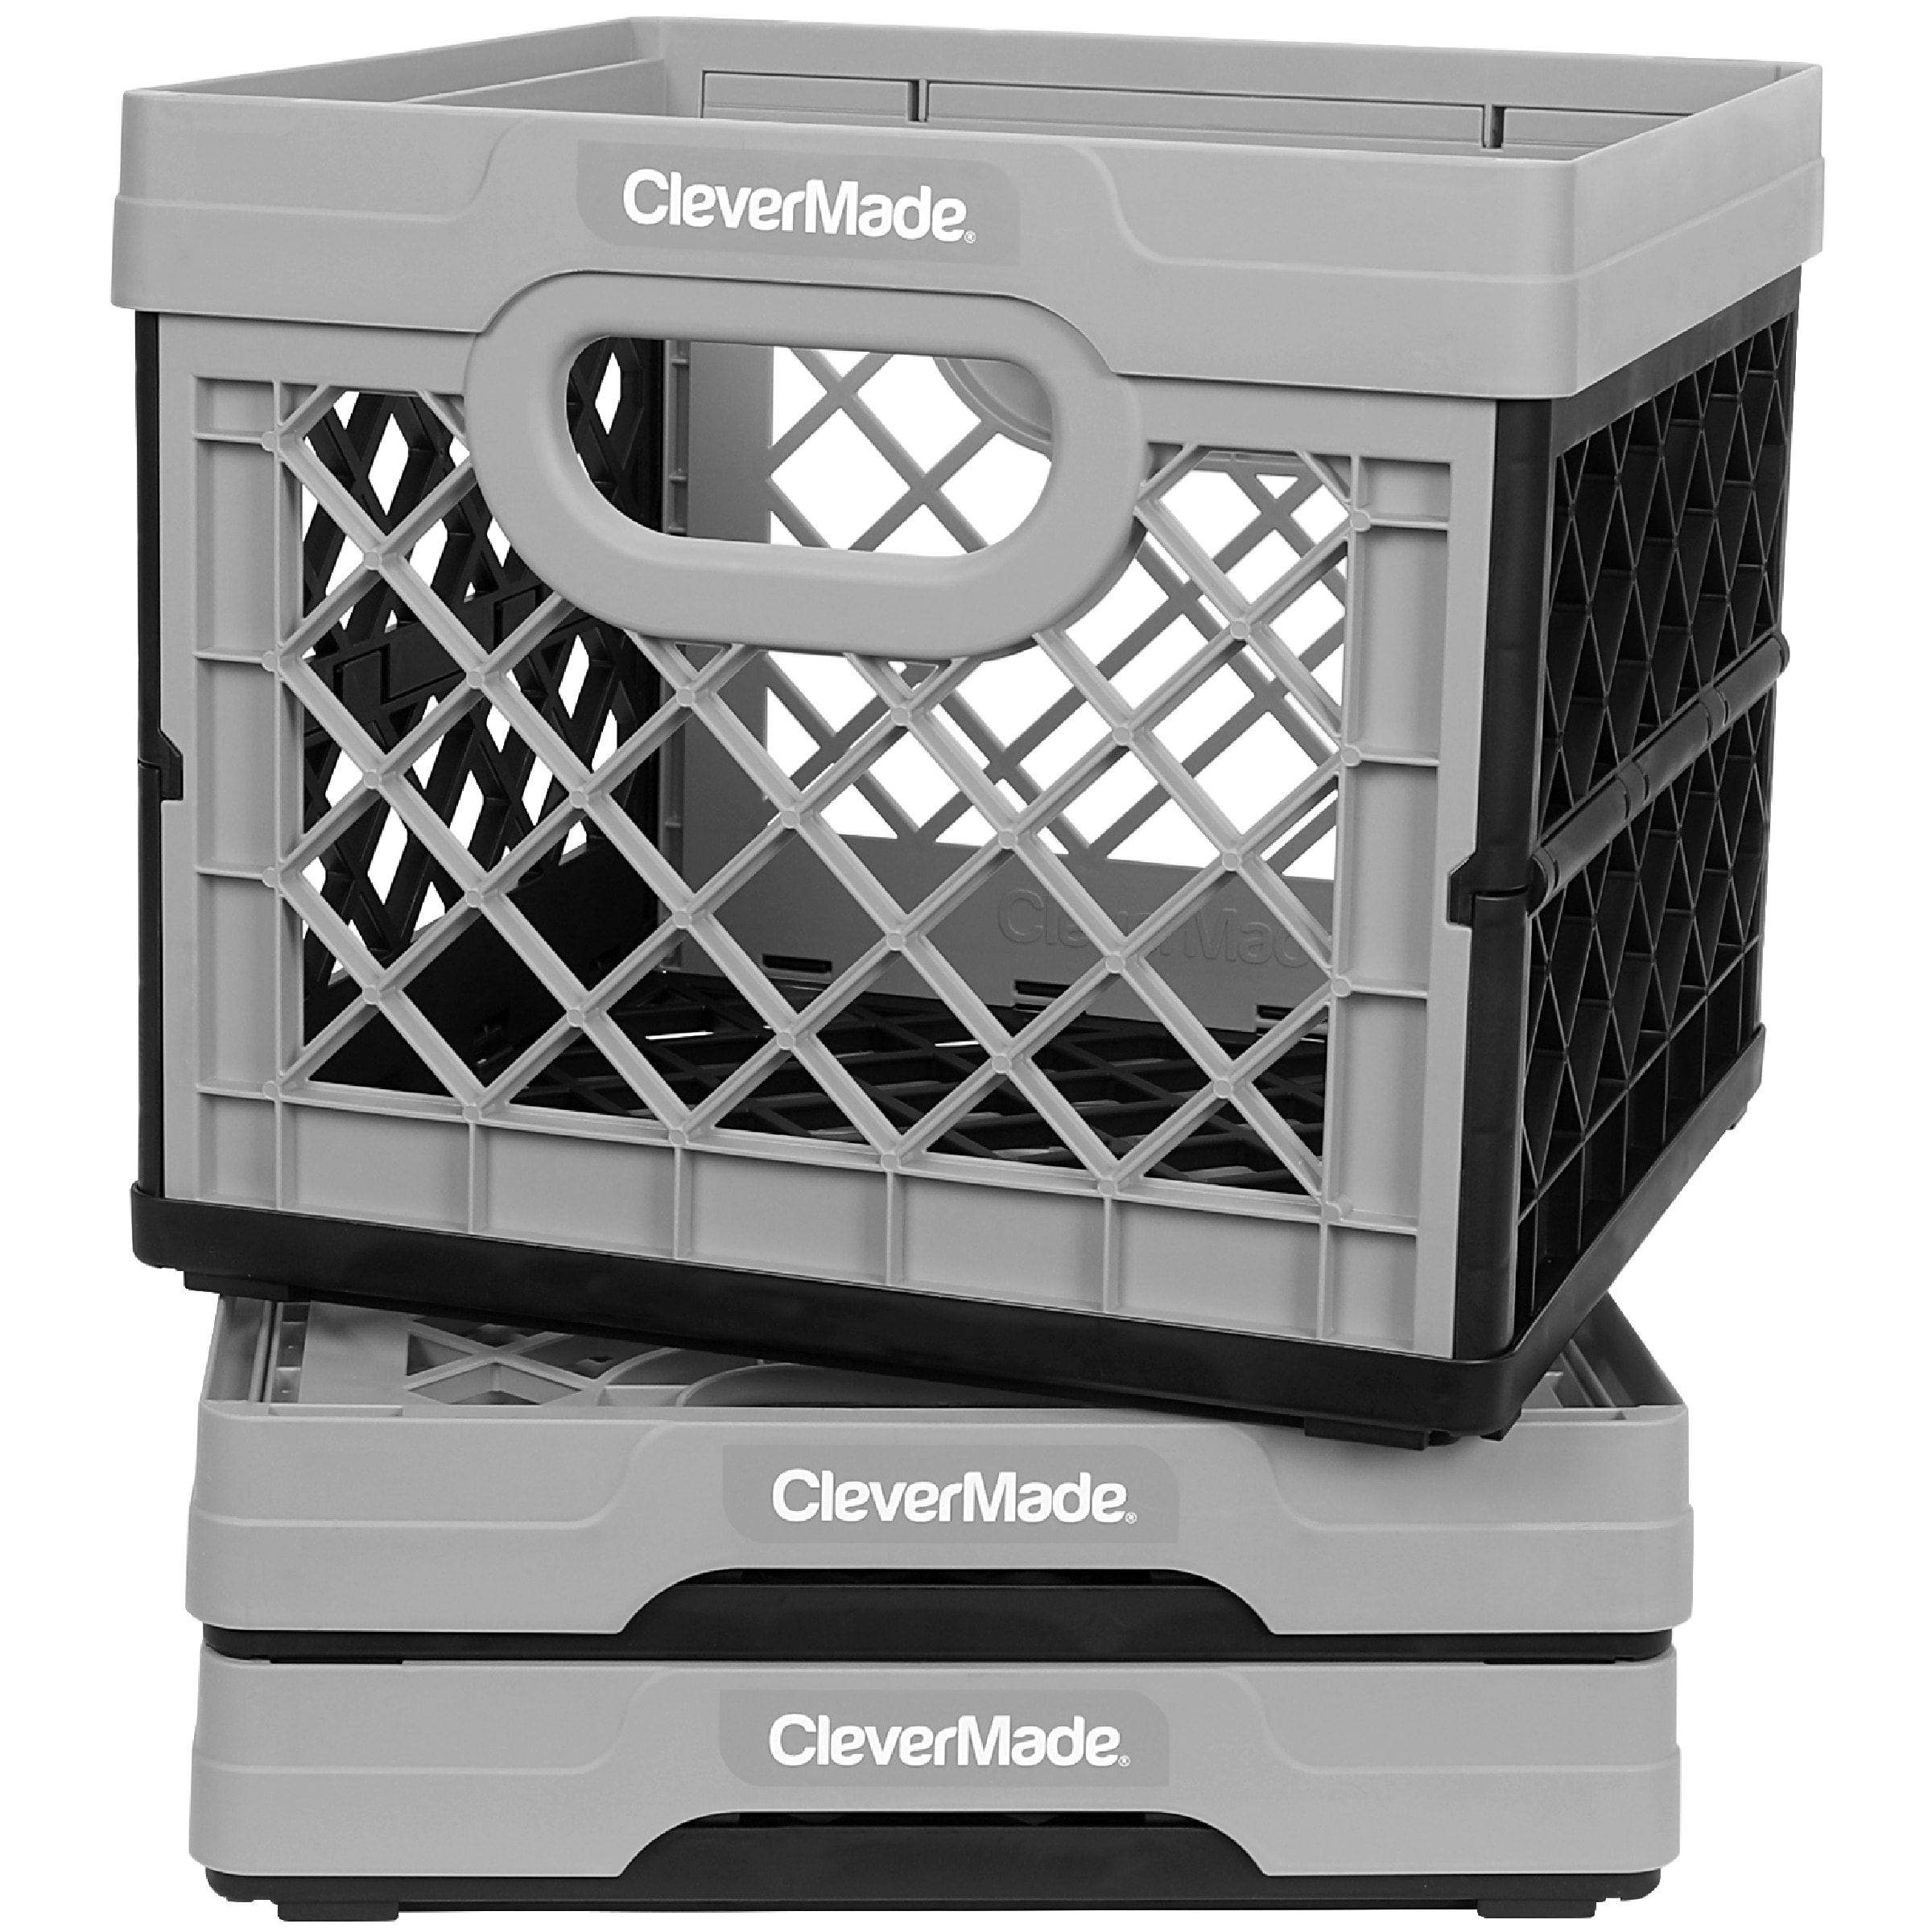 Clevermade Eco 32L Collapsible Utility Crates, Stone Grey, 3 Pack